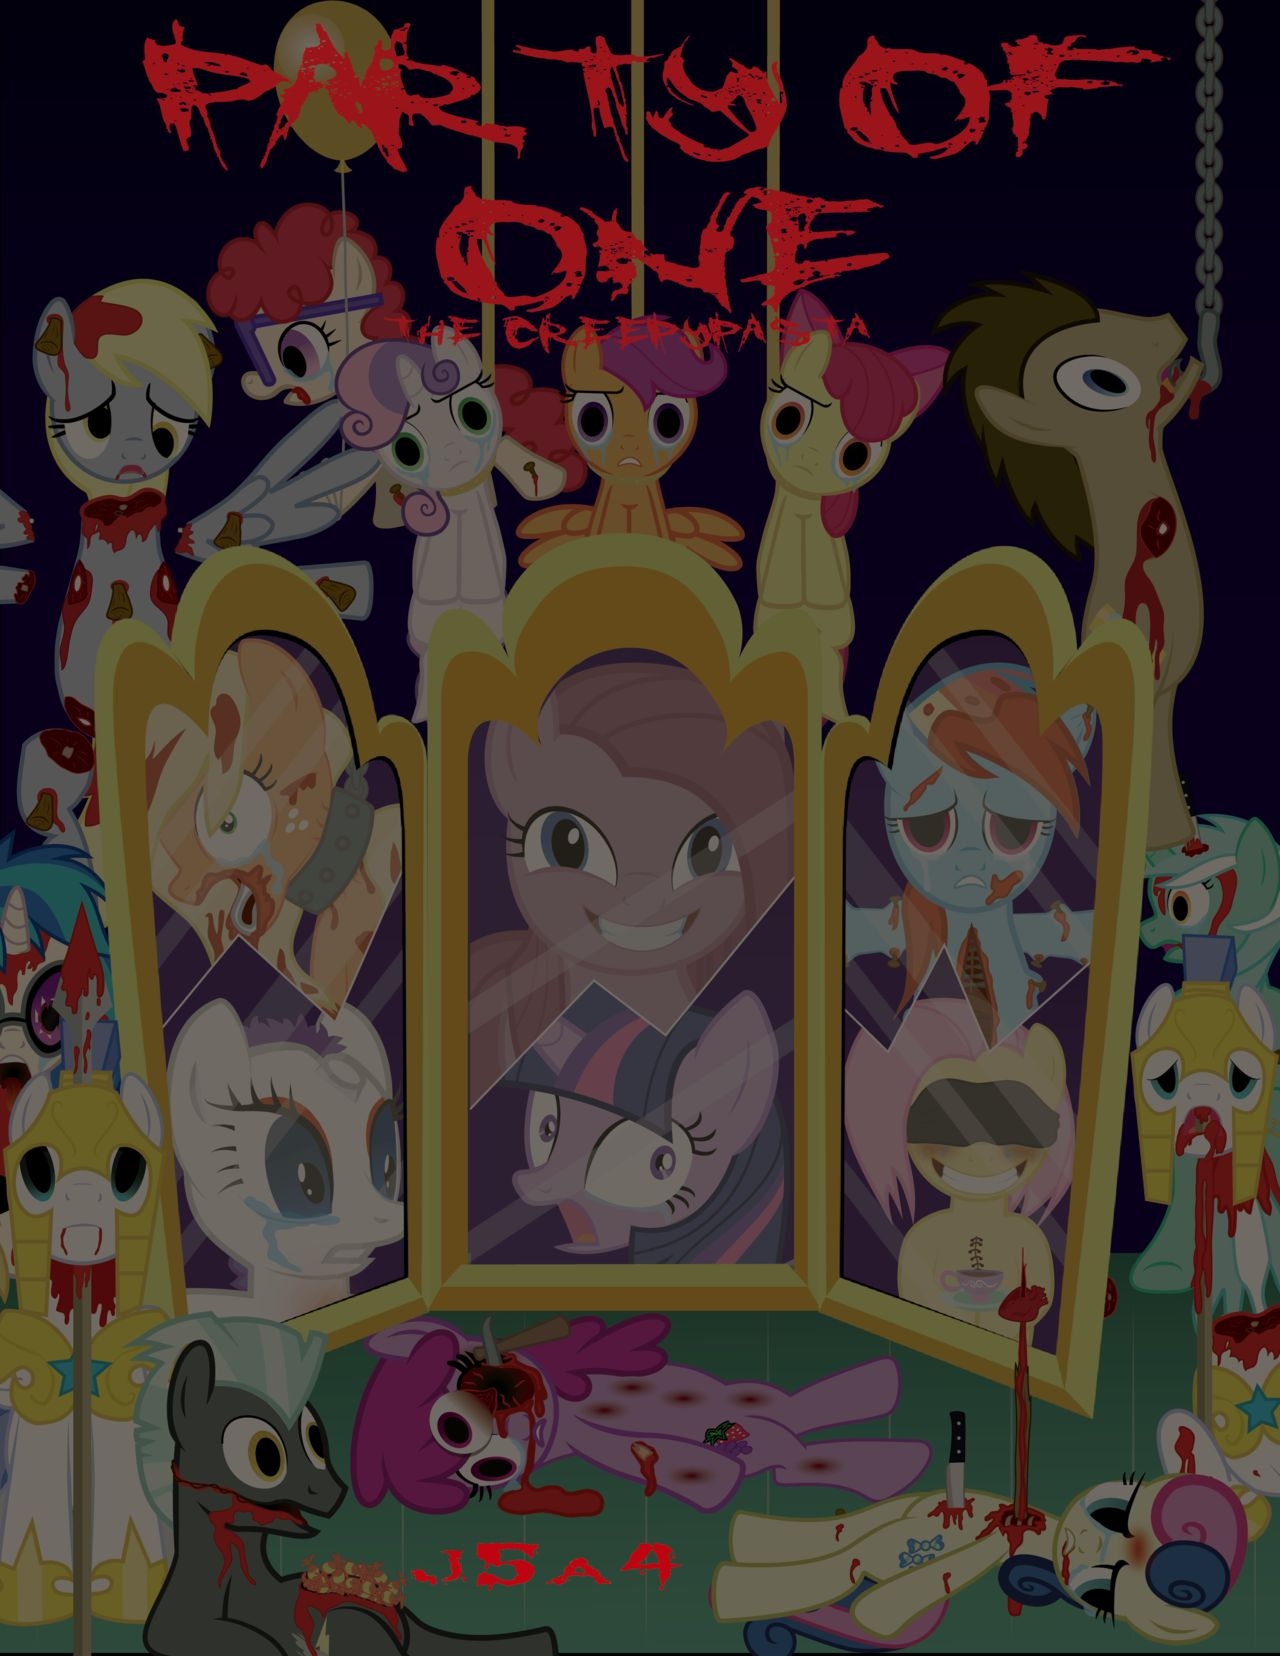 [j5a4] Party Of One (My Little Pony: Friendship is Magic) [English] 0